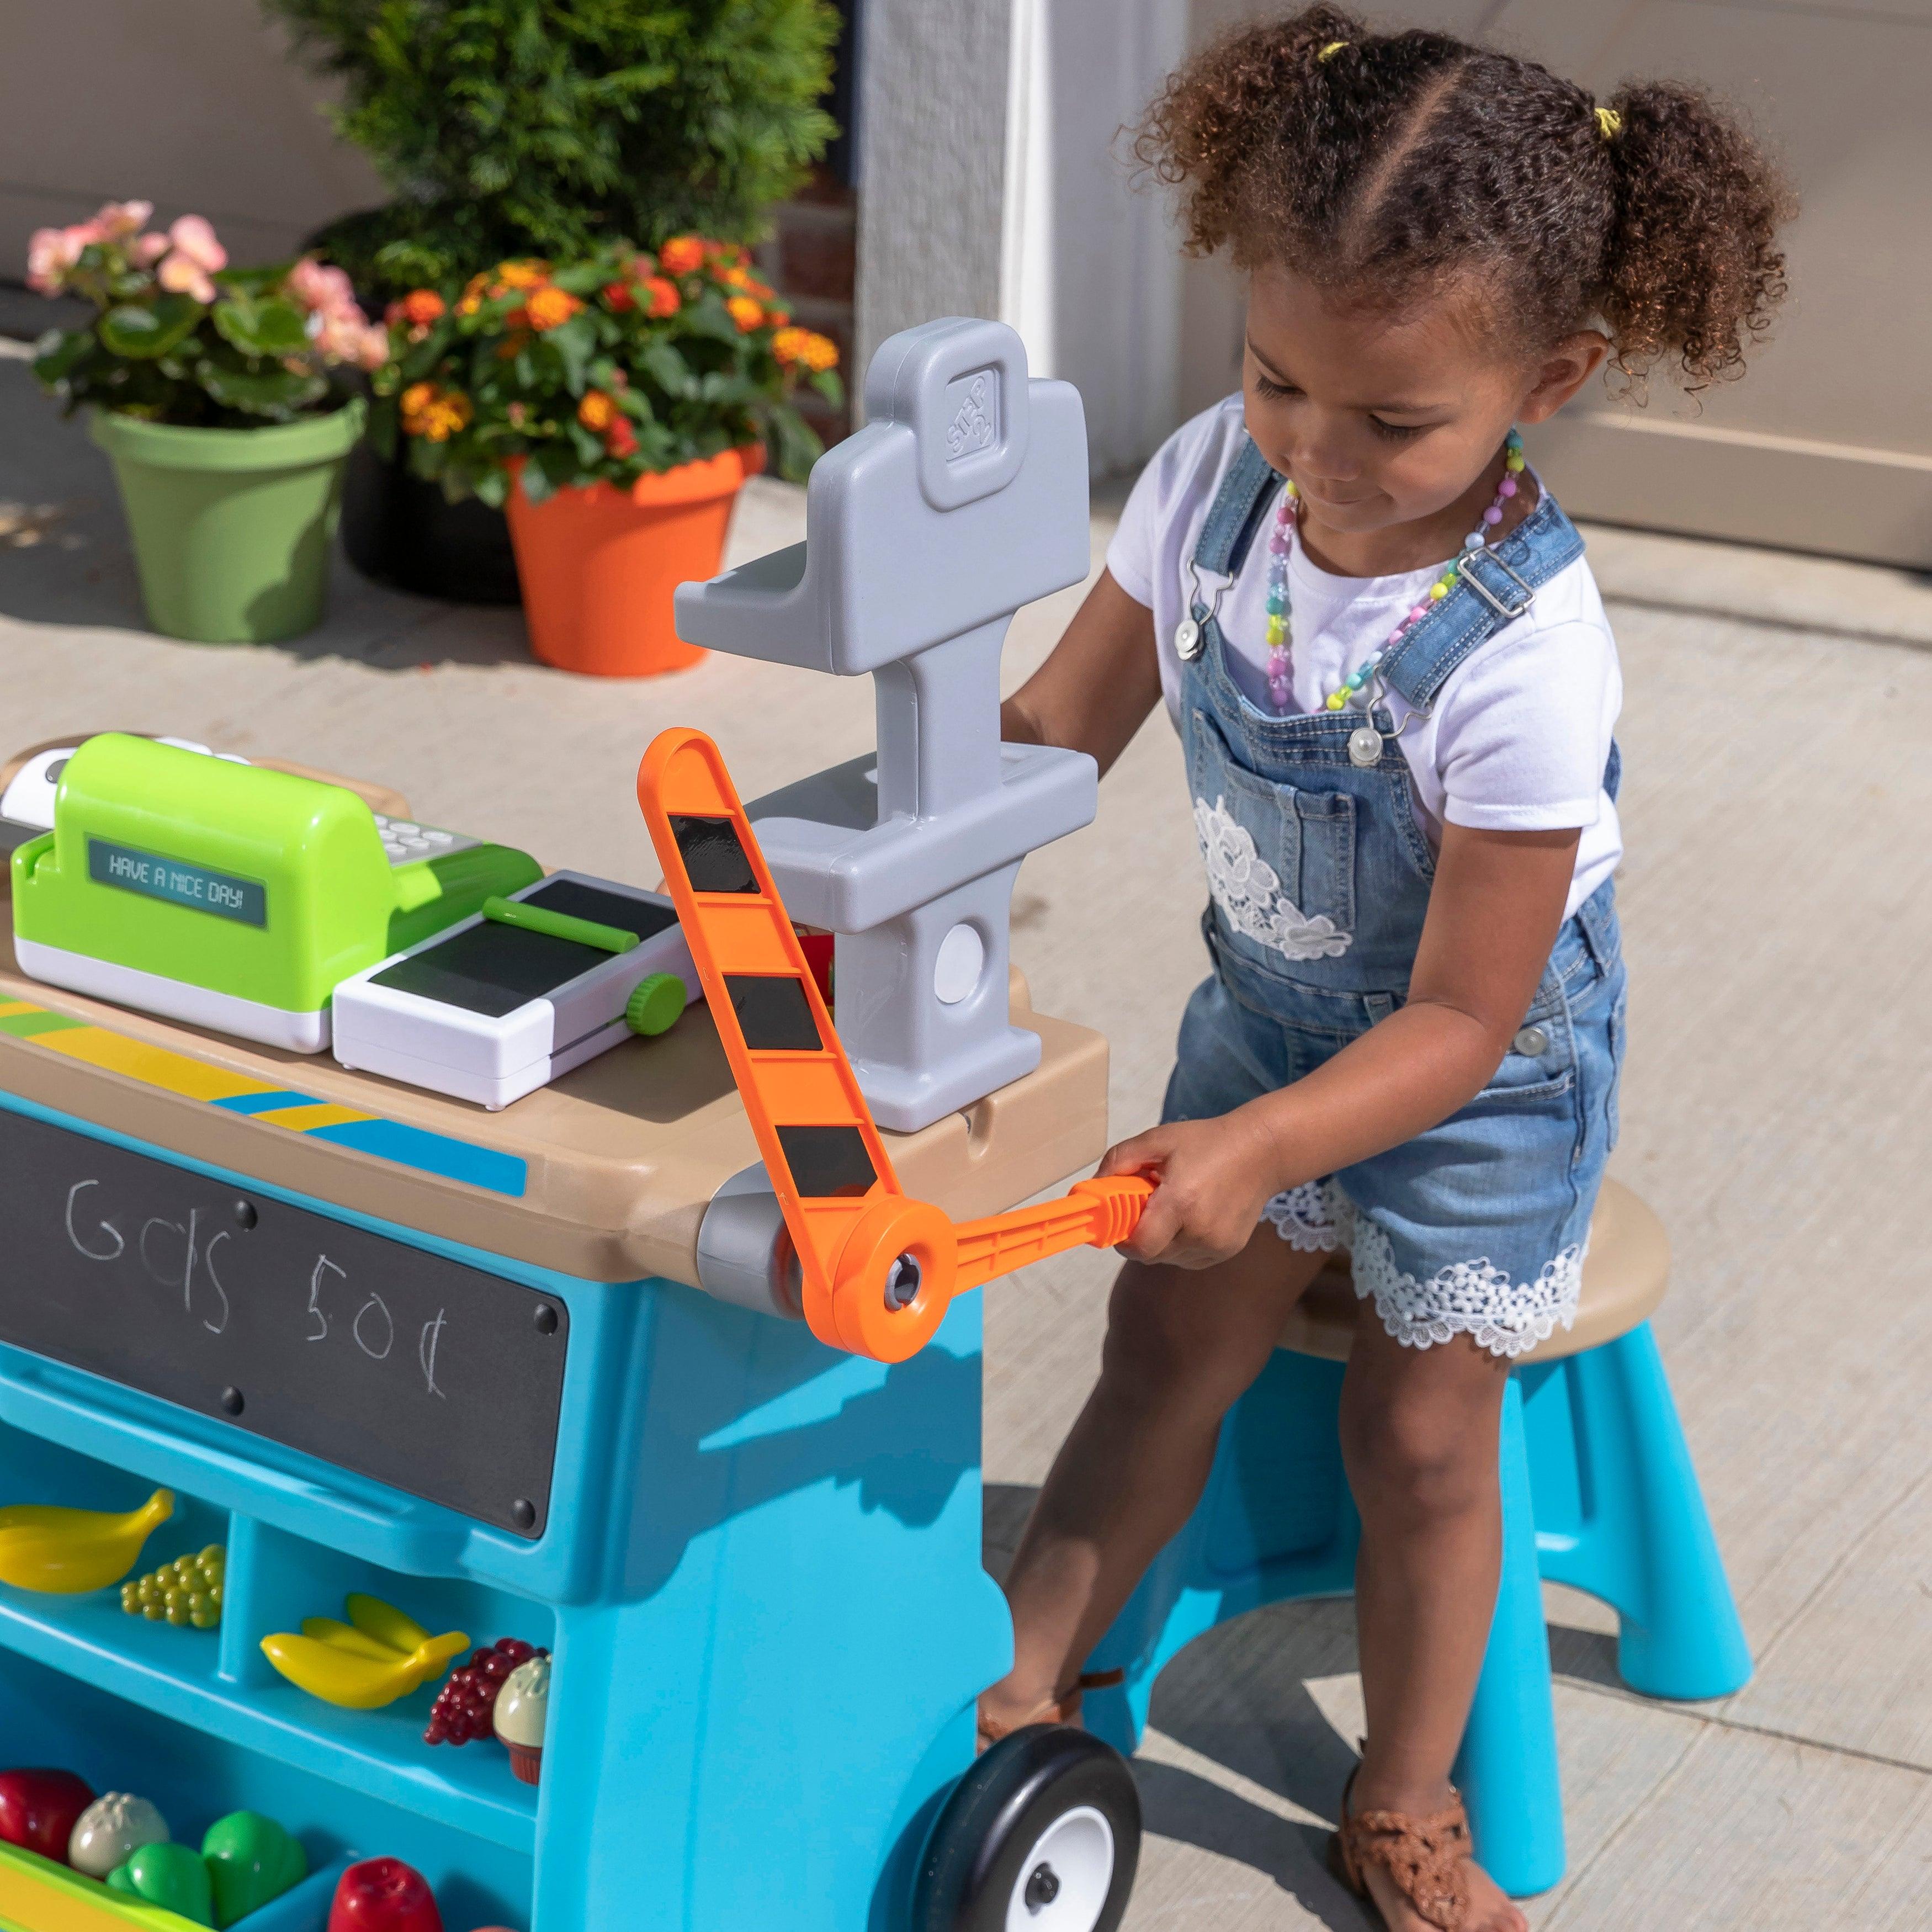 Step2 Stop & Go Market Kids Pretend Play Store & Toll Booth with Toy Cash Register, Blue - FunCorp India